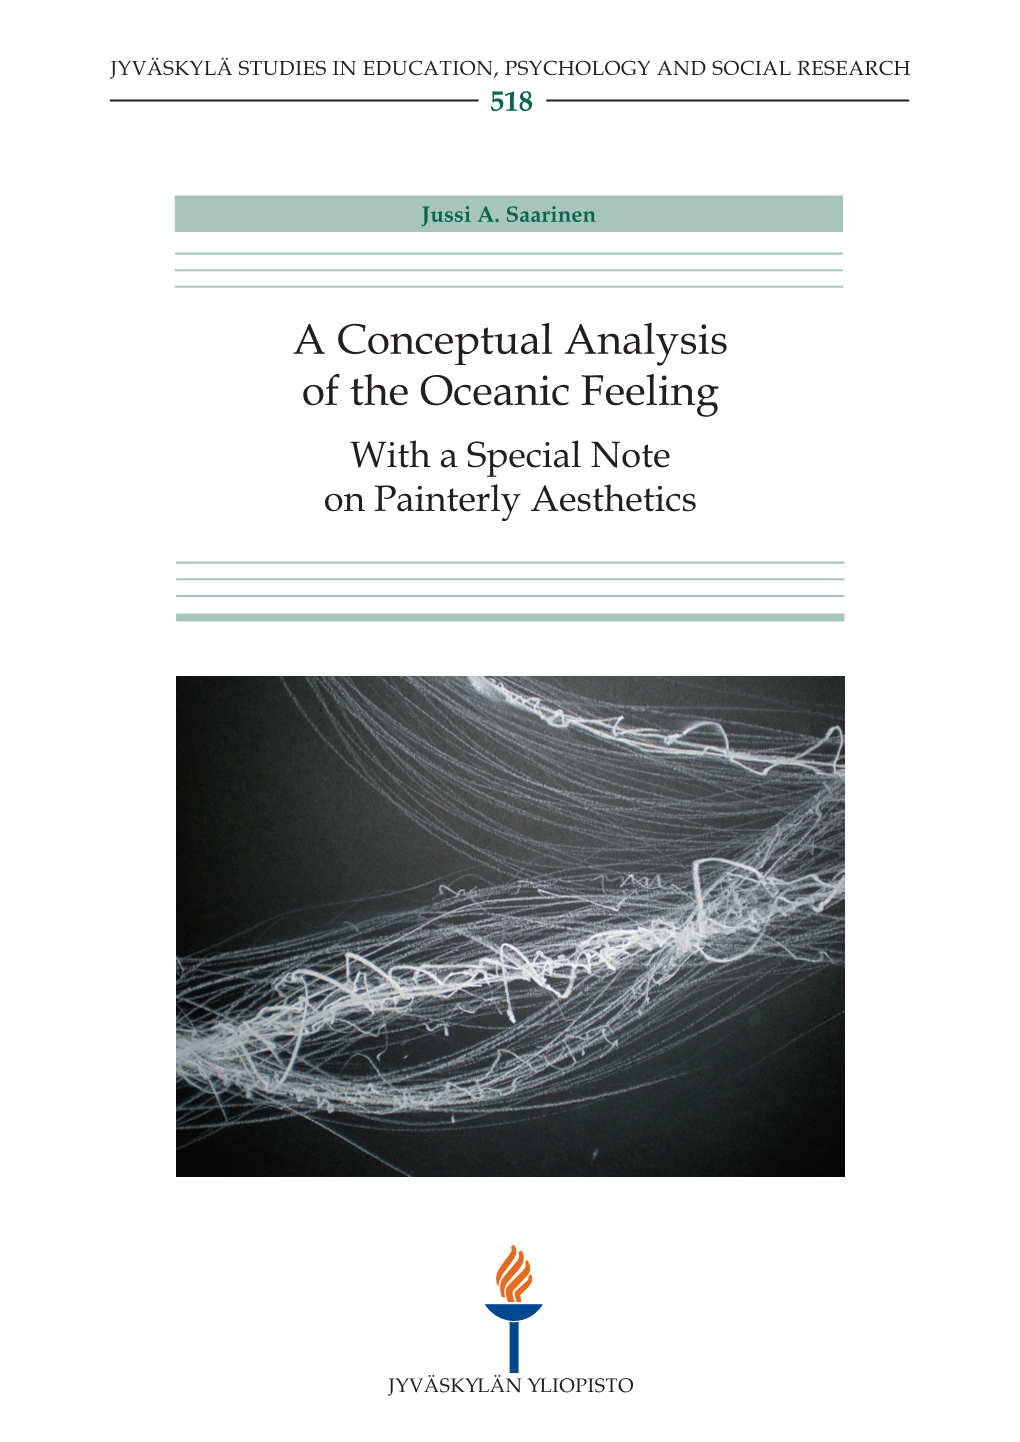 A Conceptual Analysis of the Oceanic Feeling with a Special Note on Painterly Aesthetics JYVÄSKYLÄ STUDIES in EDUCATION, PSYCHOLOGY and SOCIAL RESEARCH 518